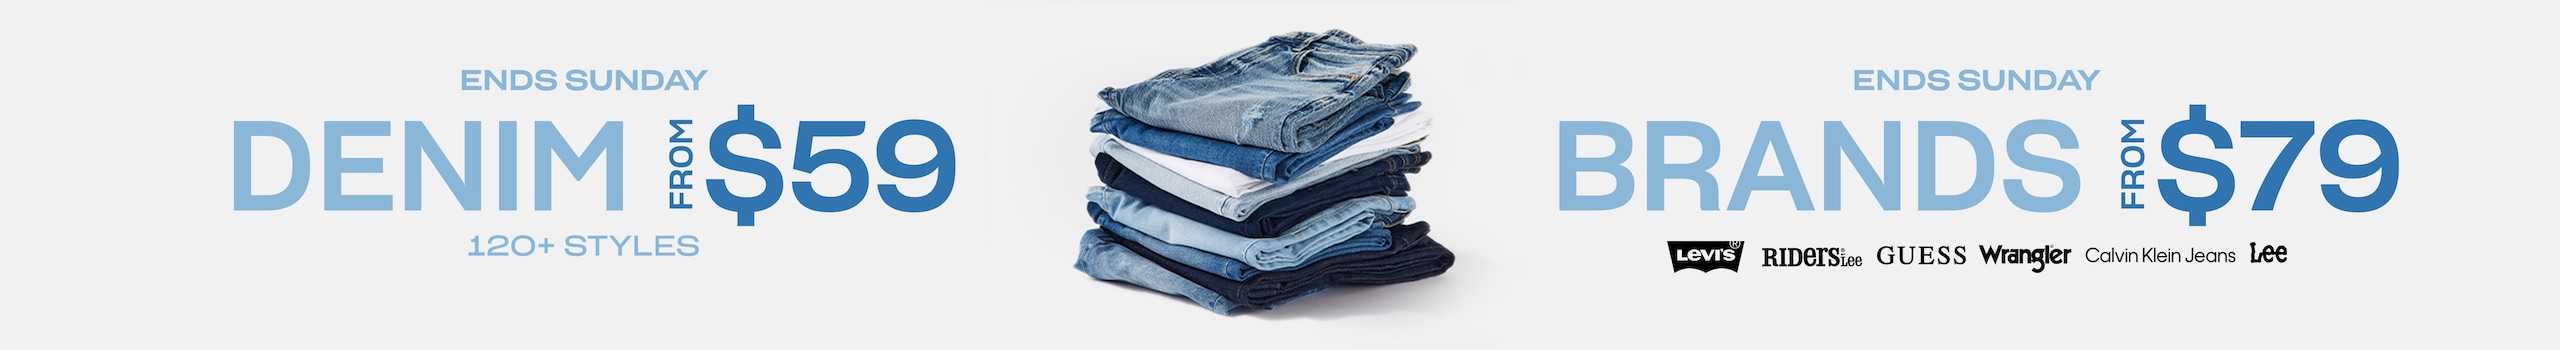 Ends Sunday. Denim From $59. Brands From $79.